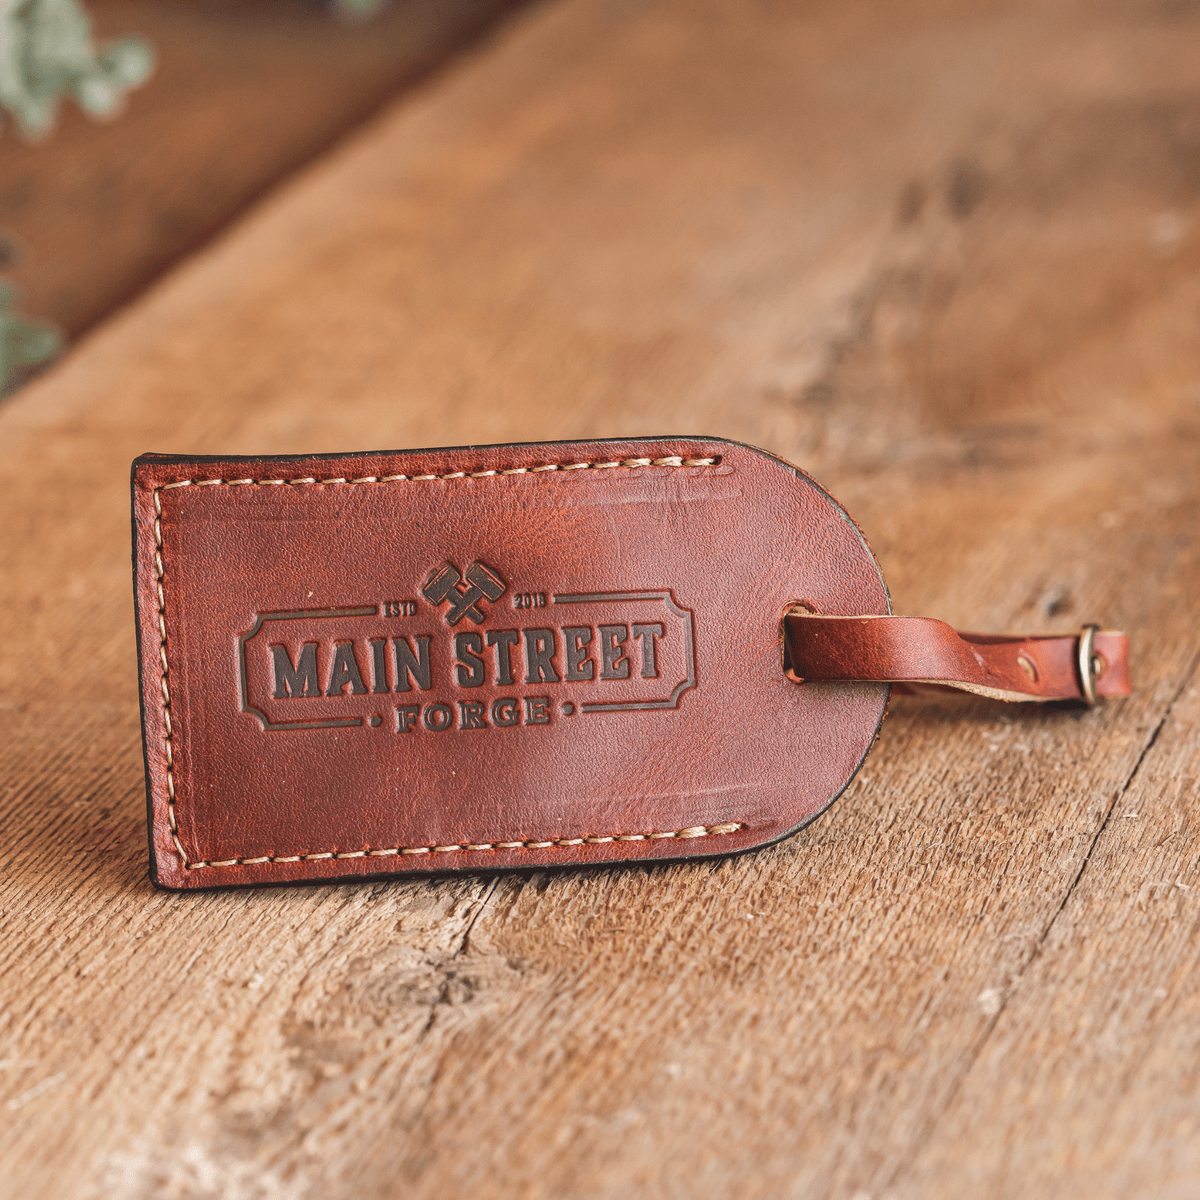 full-grain-leather-luggage-tag-main-street-forge